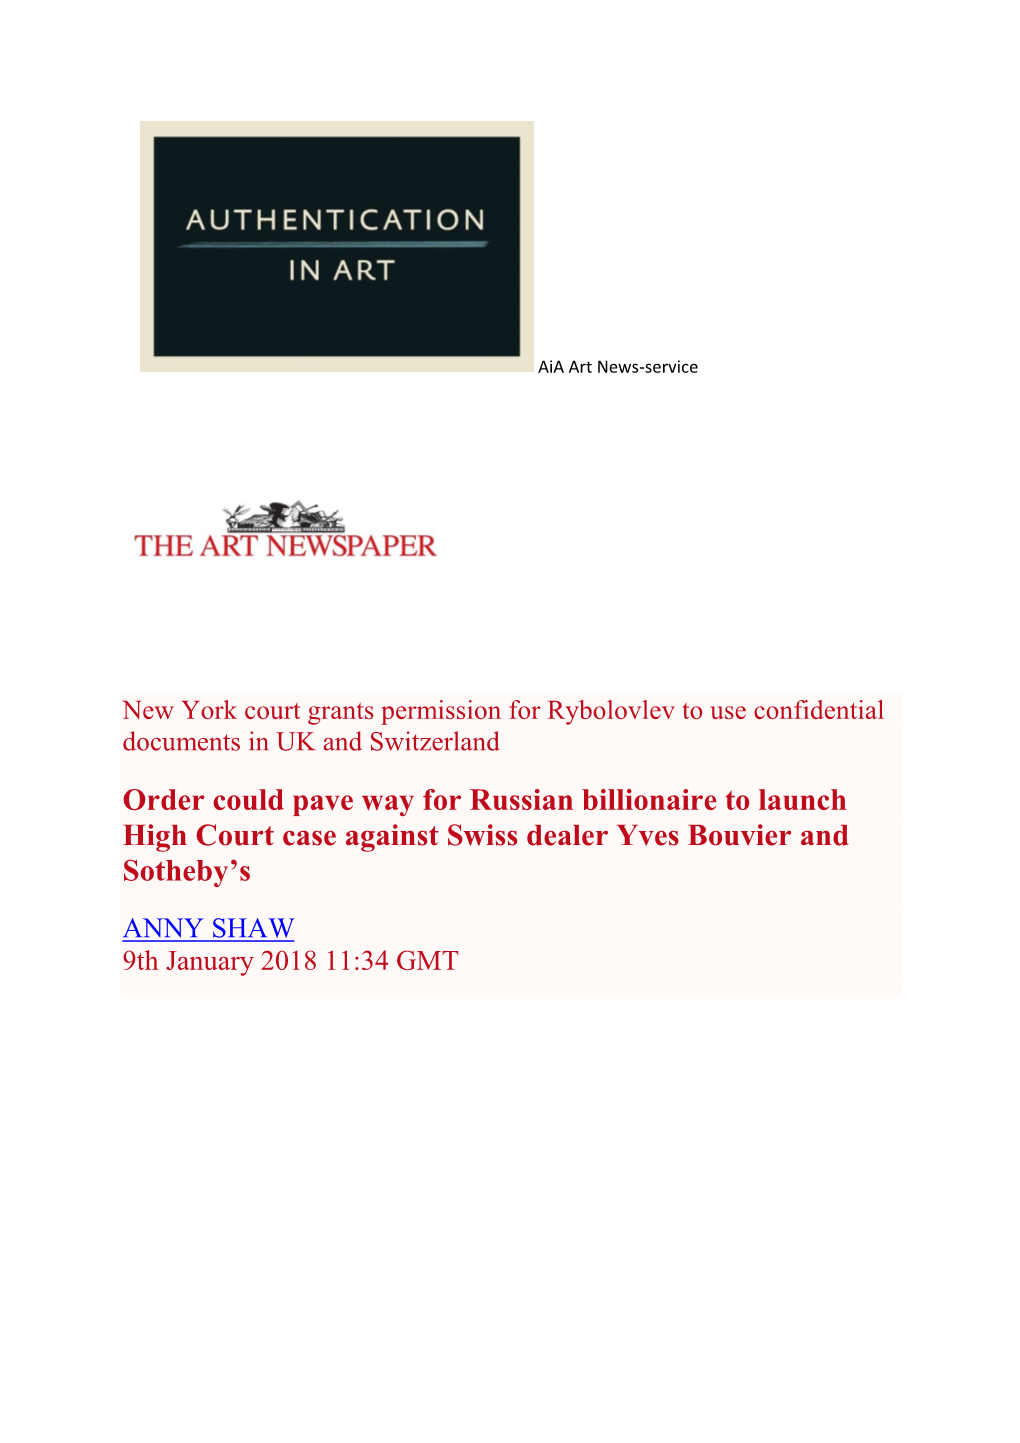 Order Could Pave Way for Russian Billionaire to Launch High Court Case Against Swiss Dealer Yves Bouvier and Sotheby’S ANNY SHAW 9Th January 2018 11:34 GMT